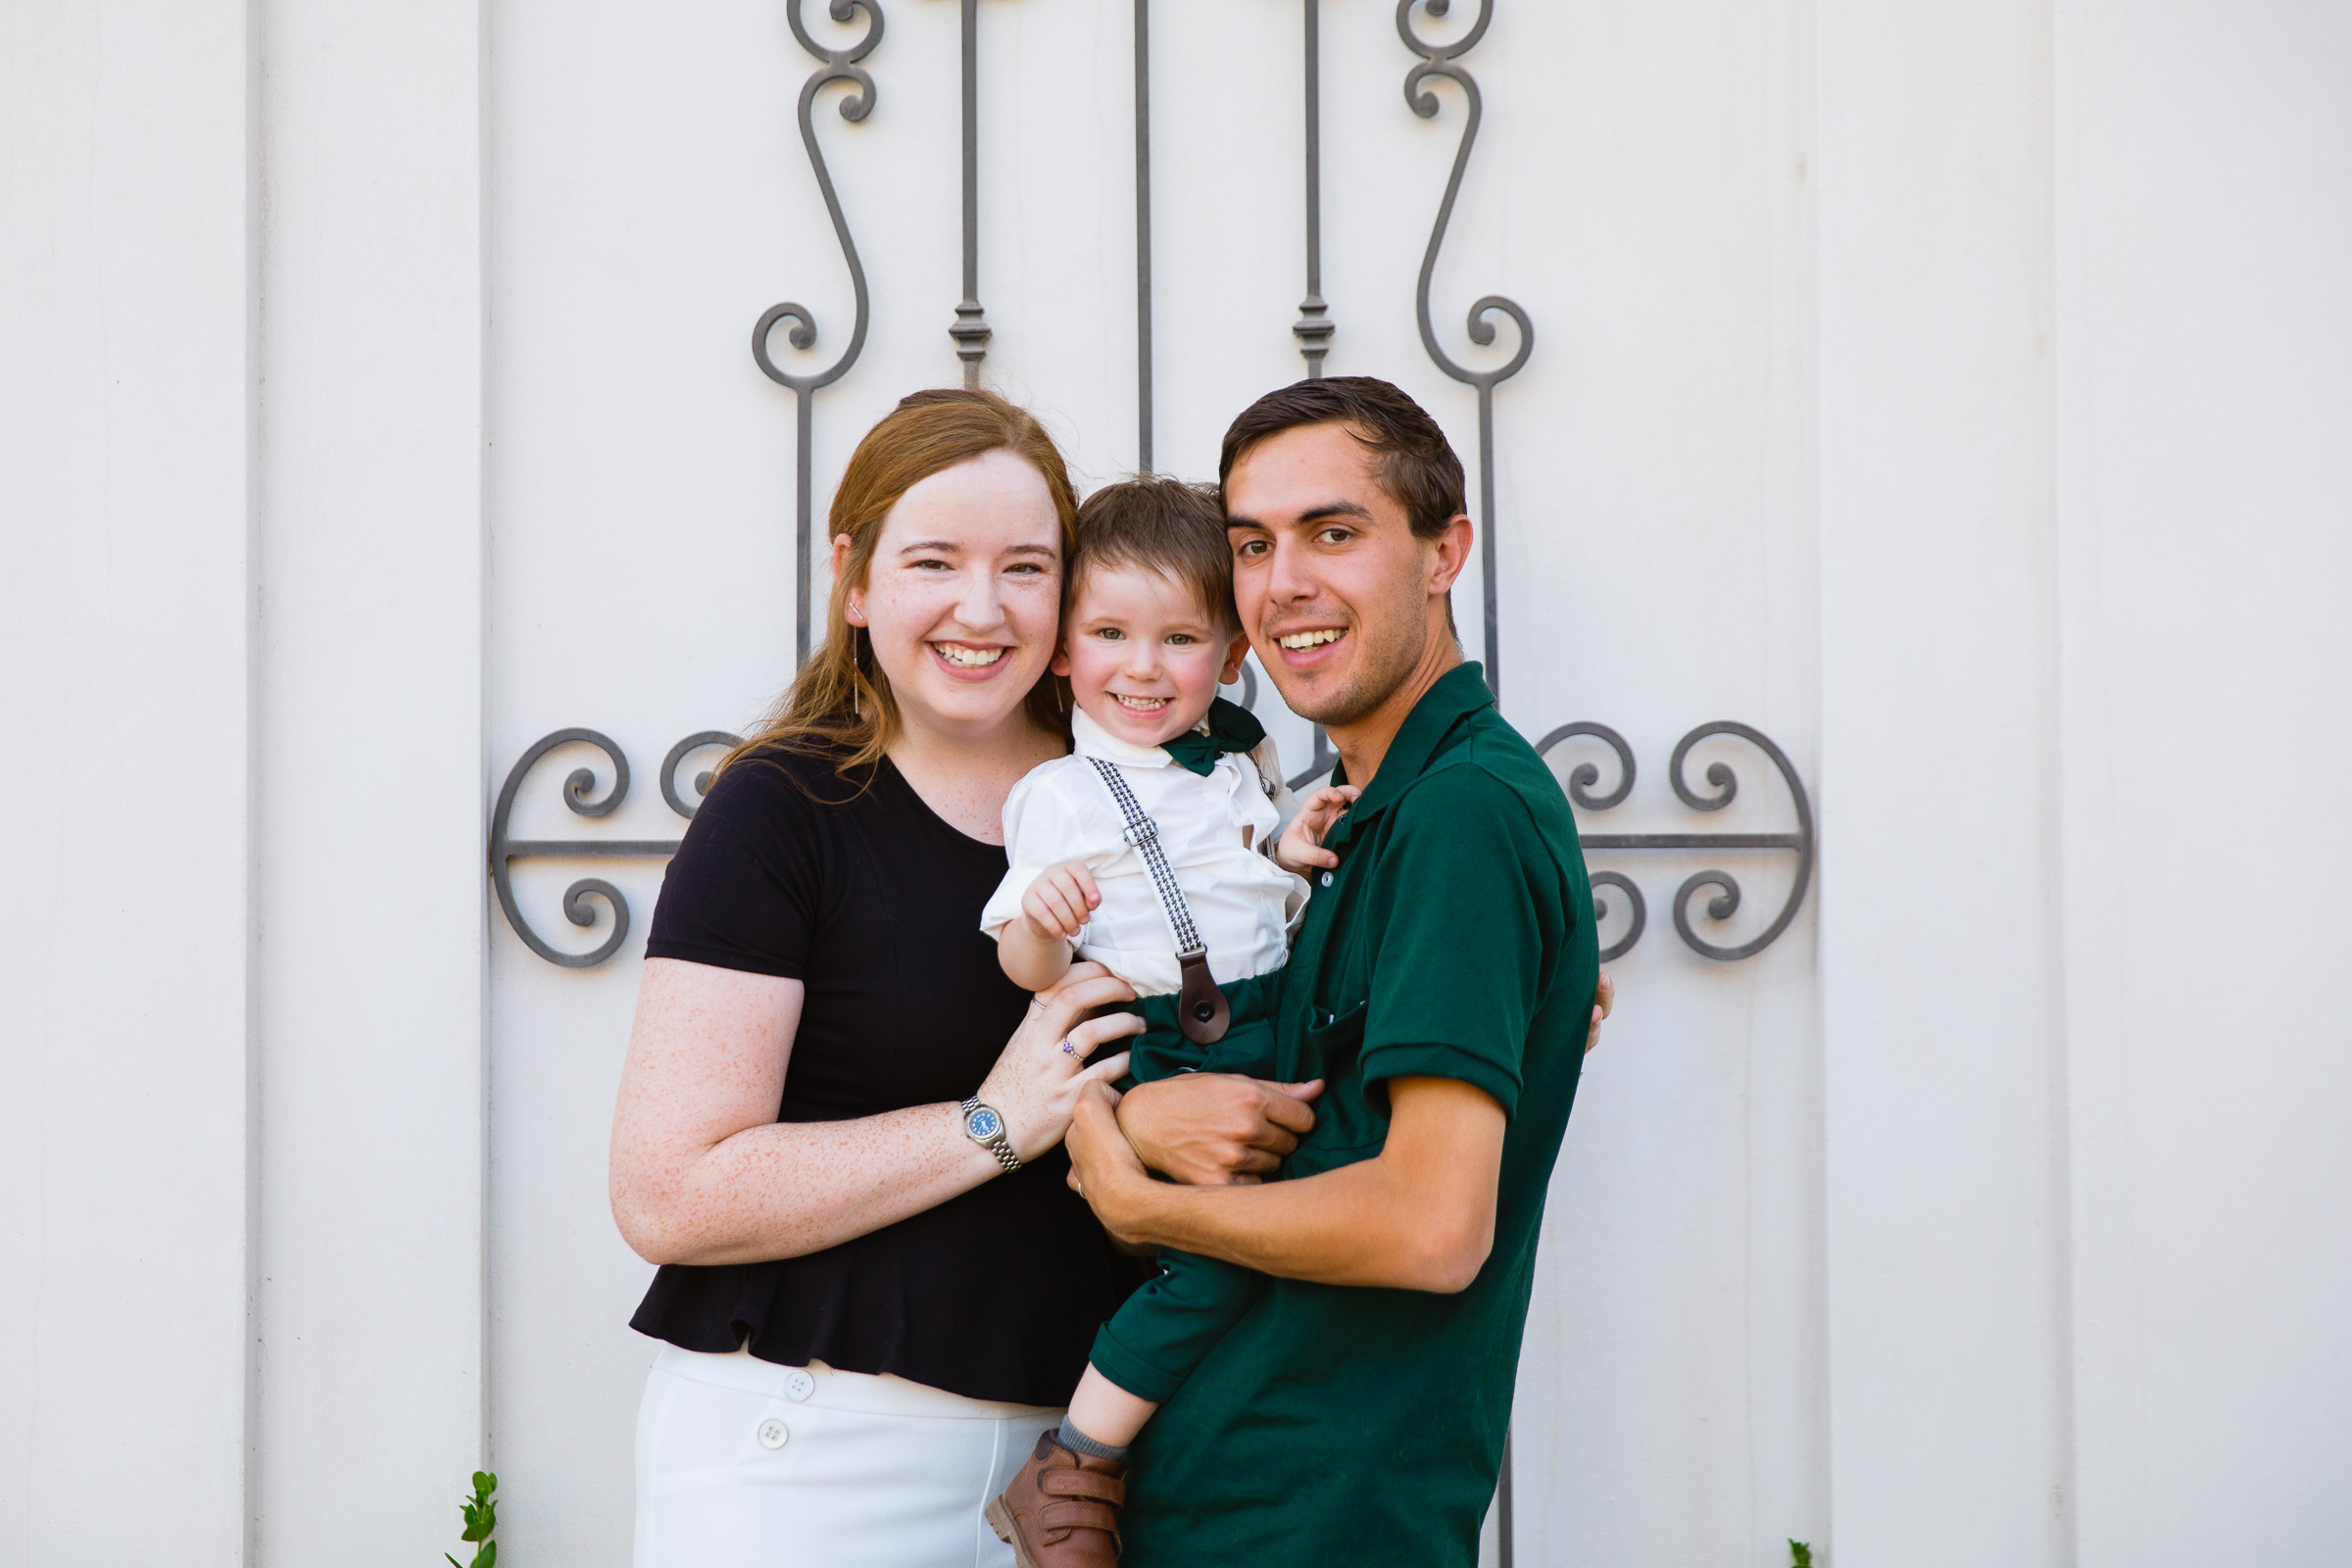 Family pose for their downtown family session by Verrado family photographer PMA Photography.